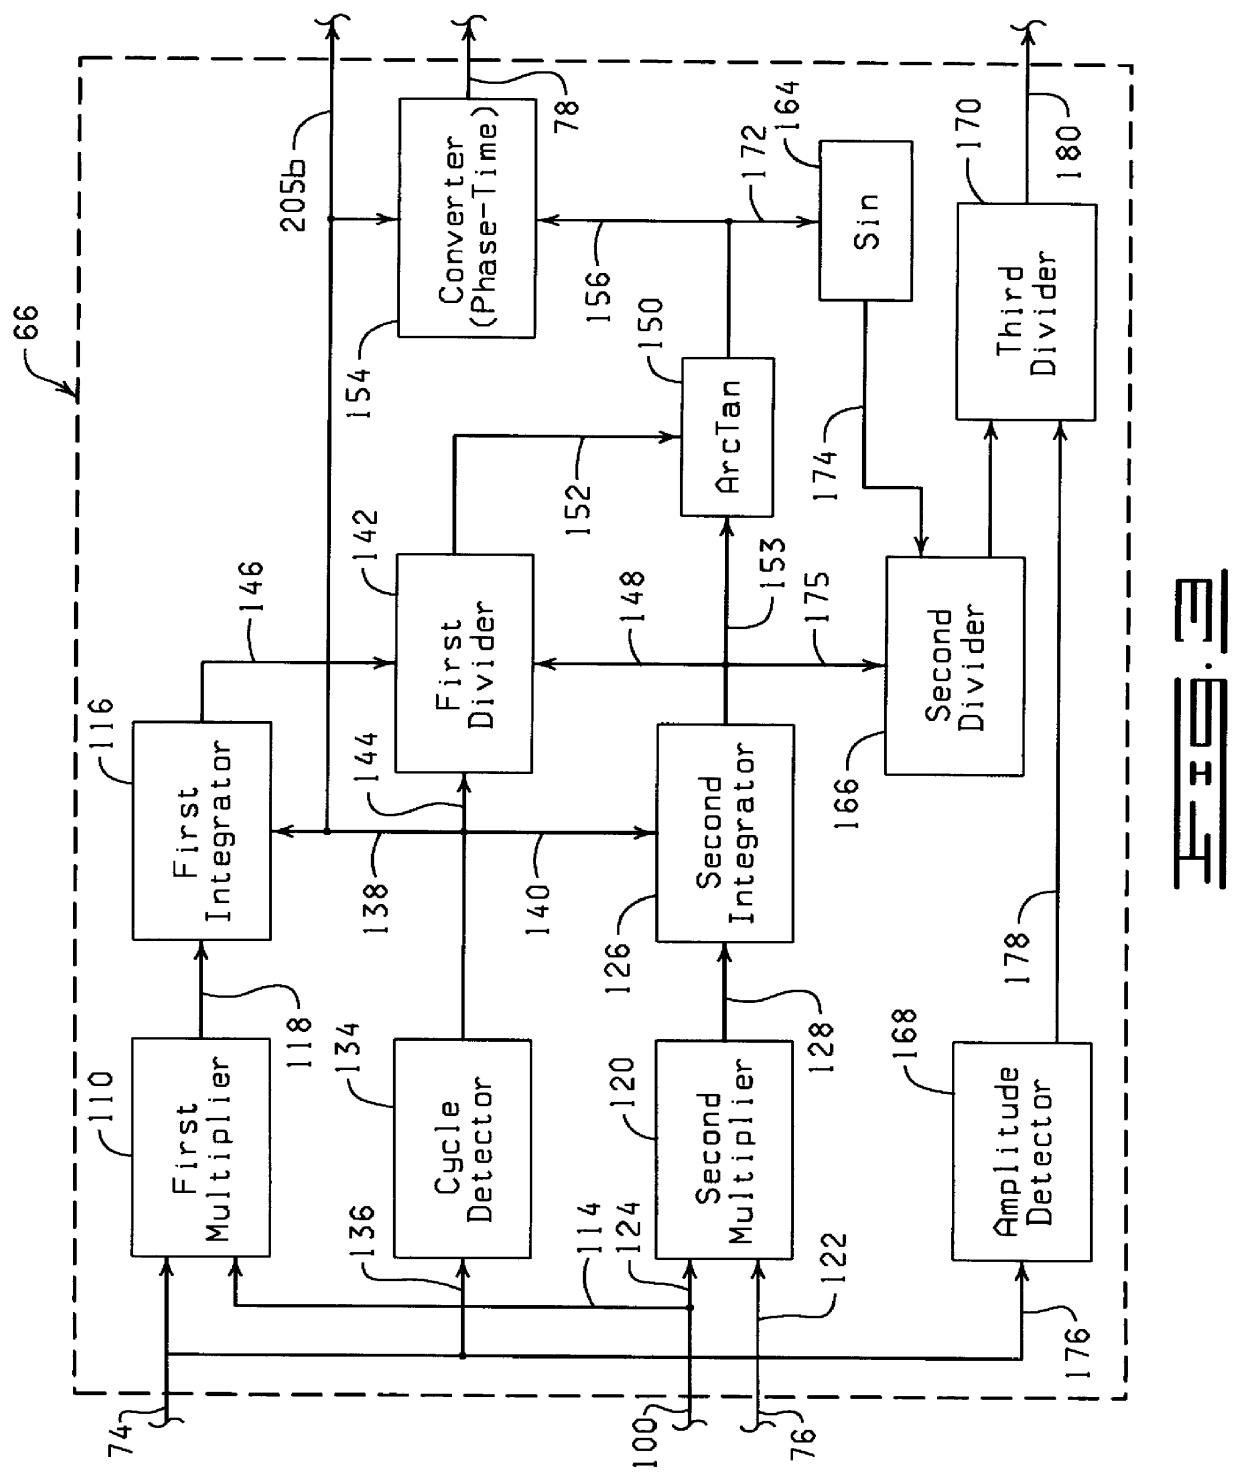 Method and apparatus for reducing harmonic distortion